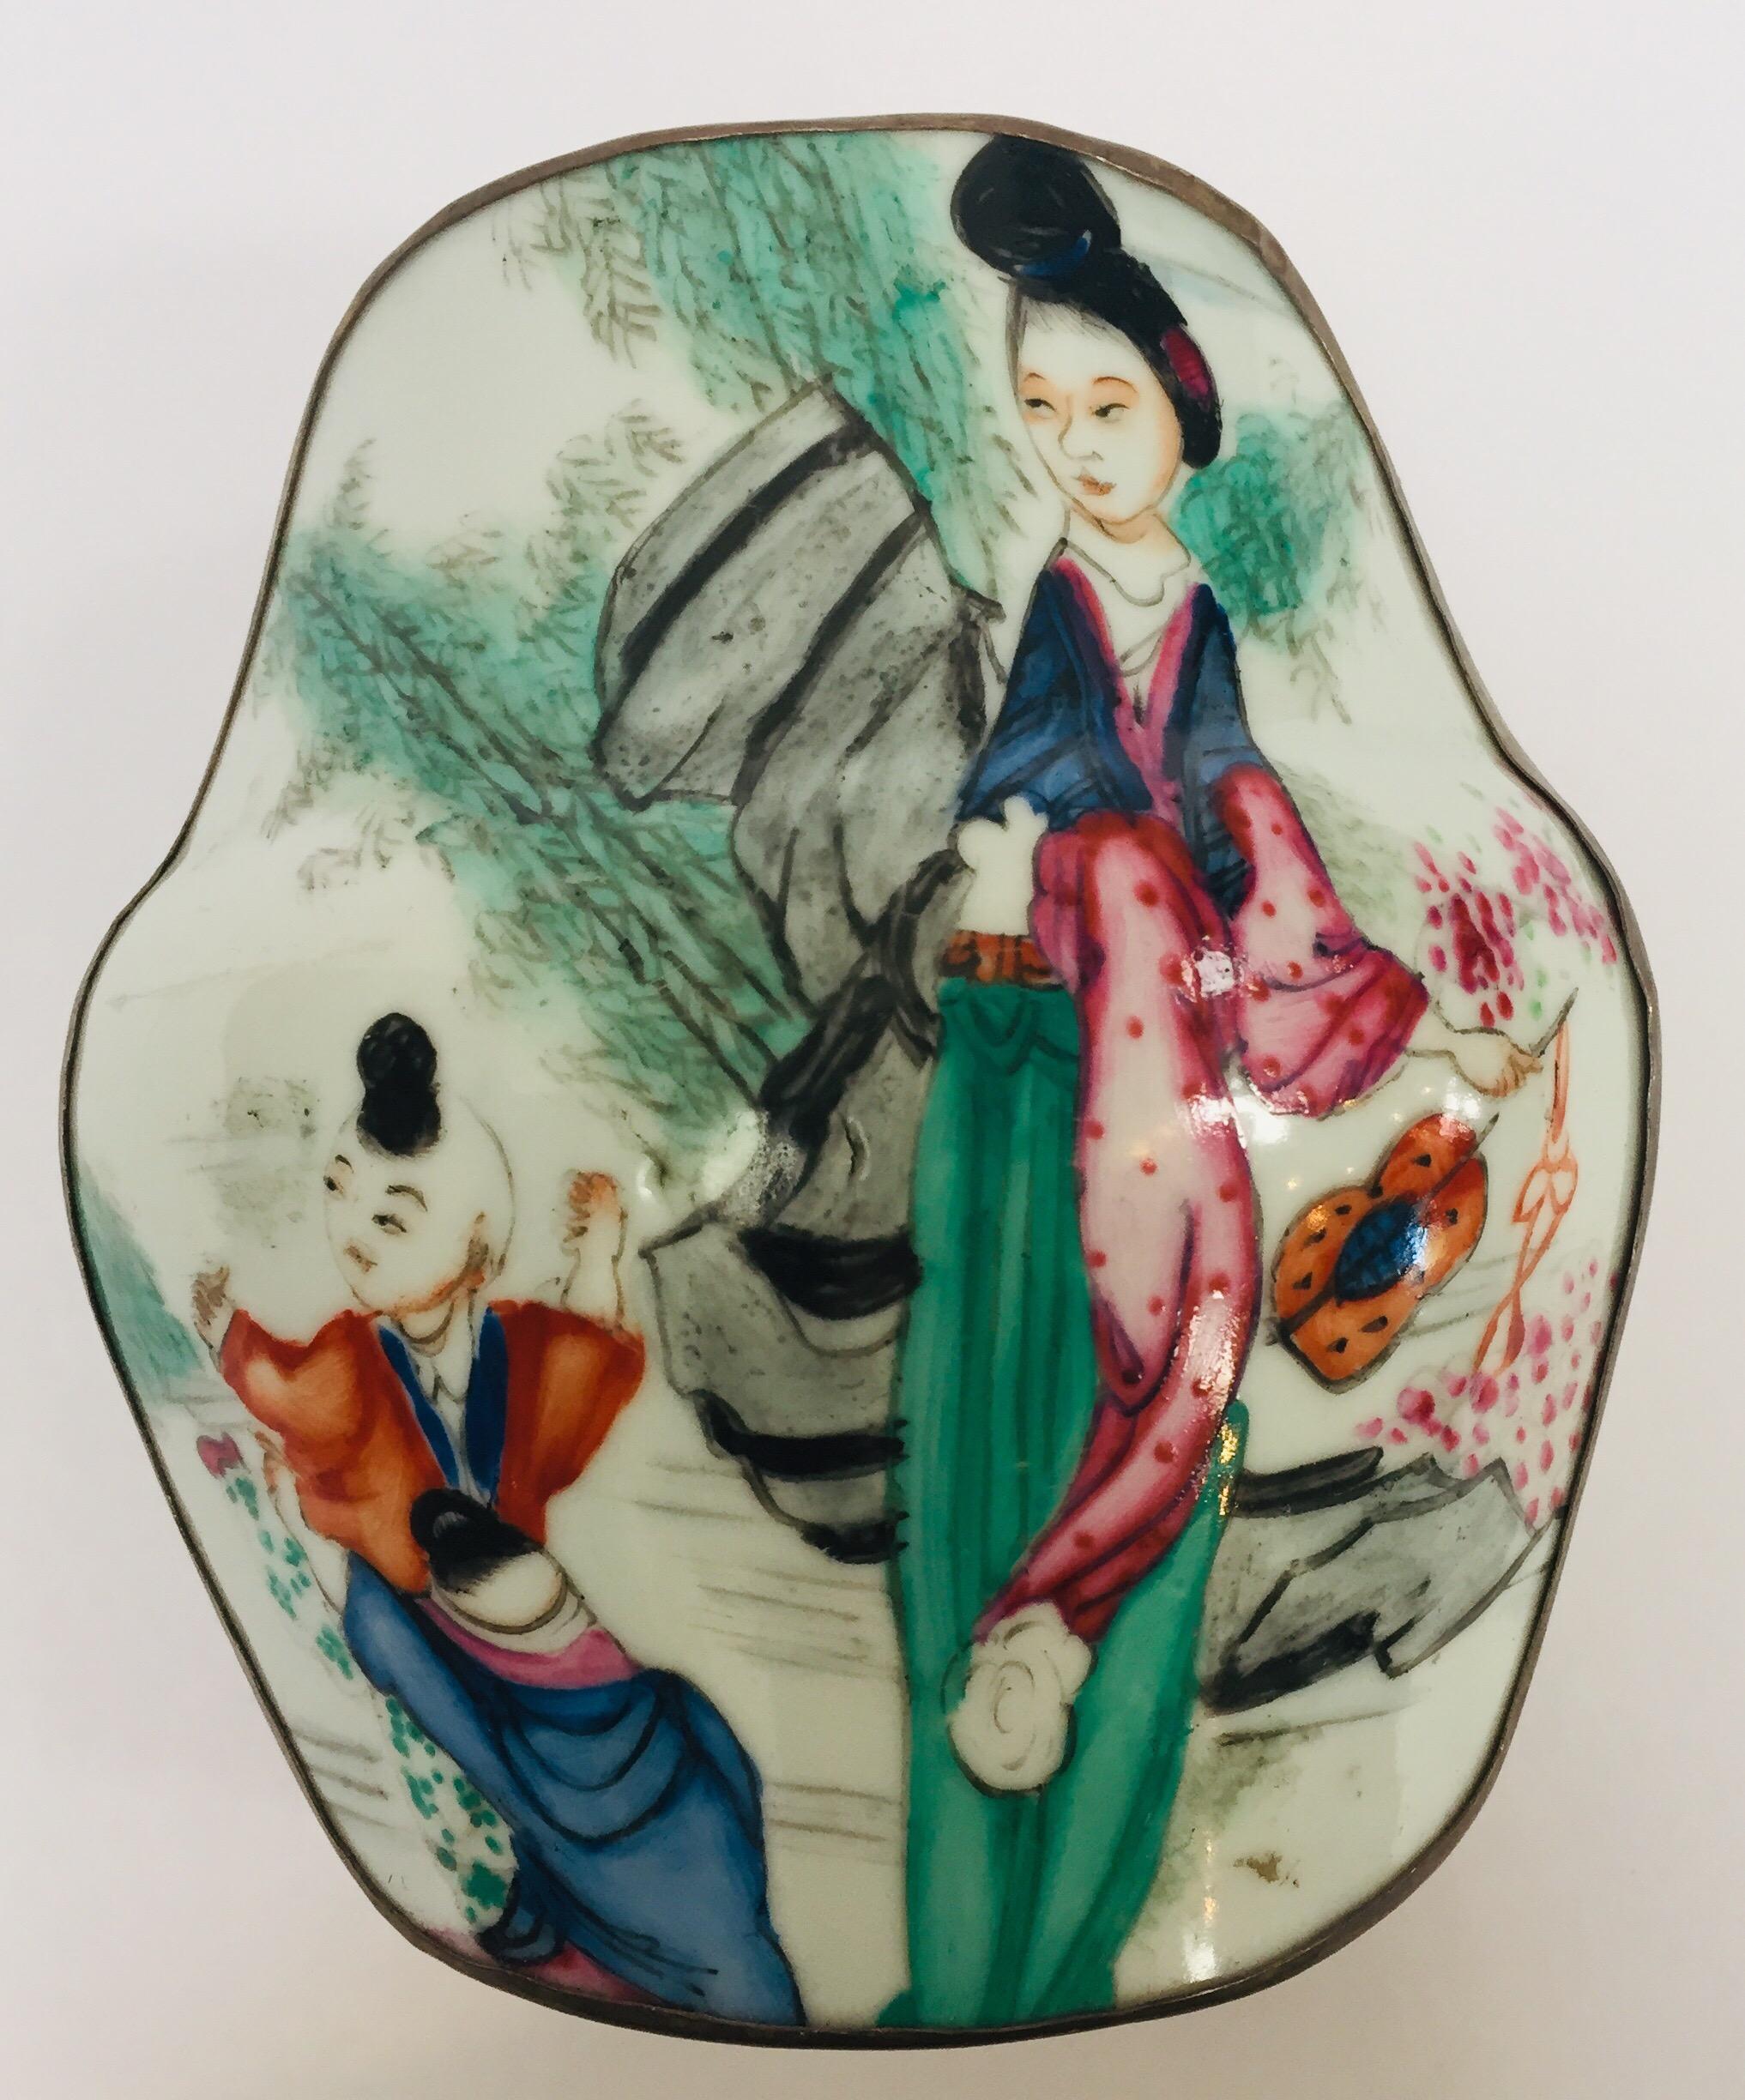 Vintage metal and porcelain trinket box with hand painted Asian Japanese scene.
Metal silvered with porcelain top hand painted with an outdoor scene with a mother and child wearing traditional kimonos in pink, green and blue colors.
Dimensions: